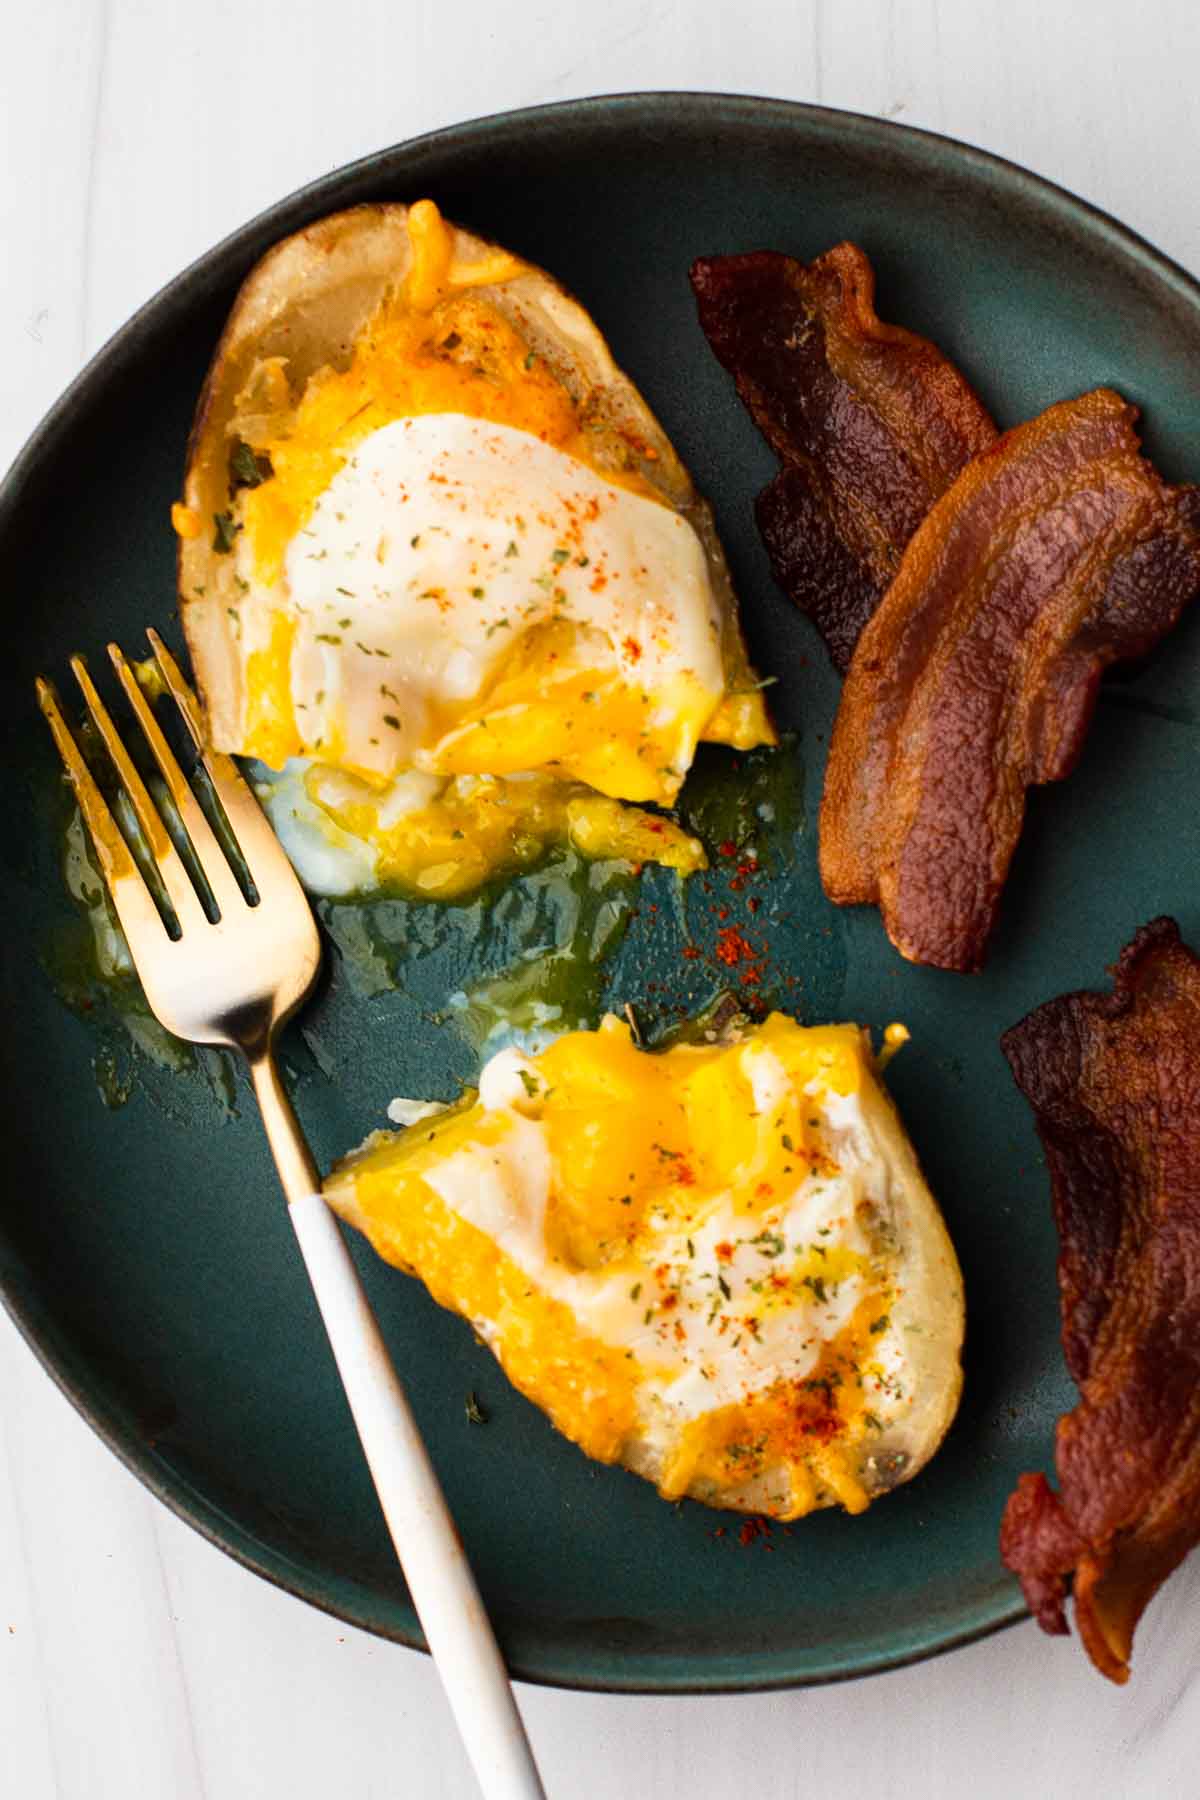 Twice baked breakfast potato served with bacon.